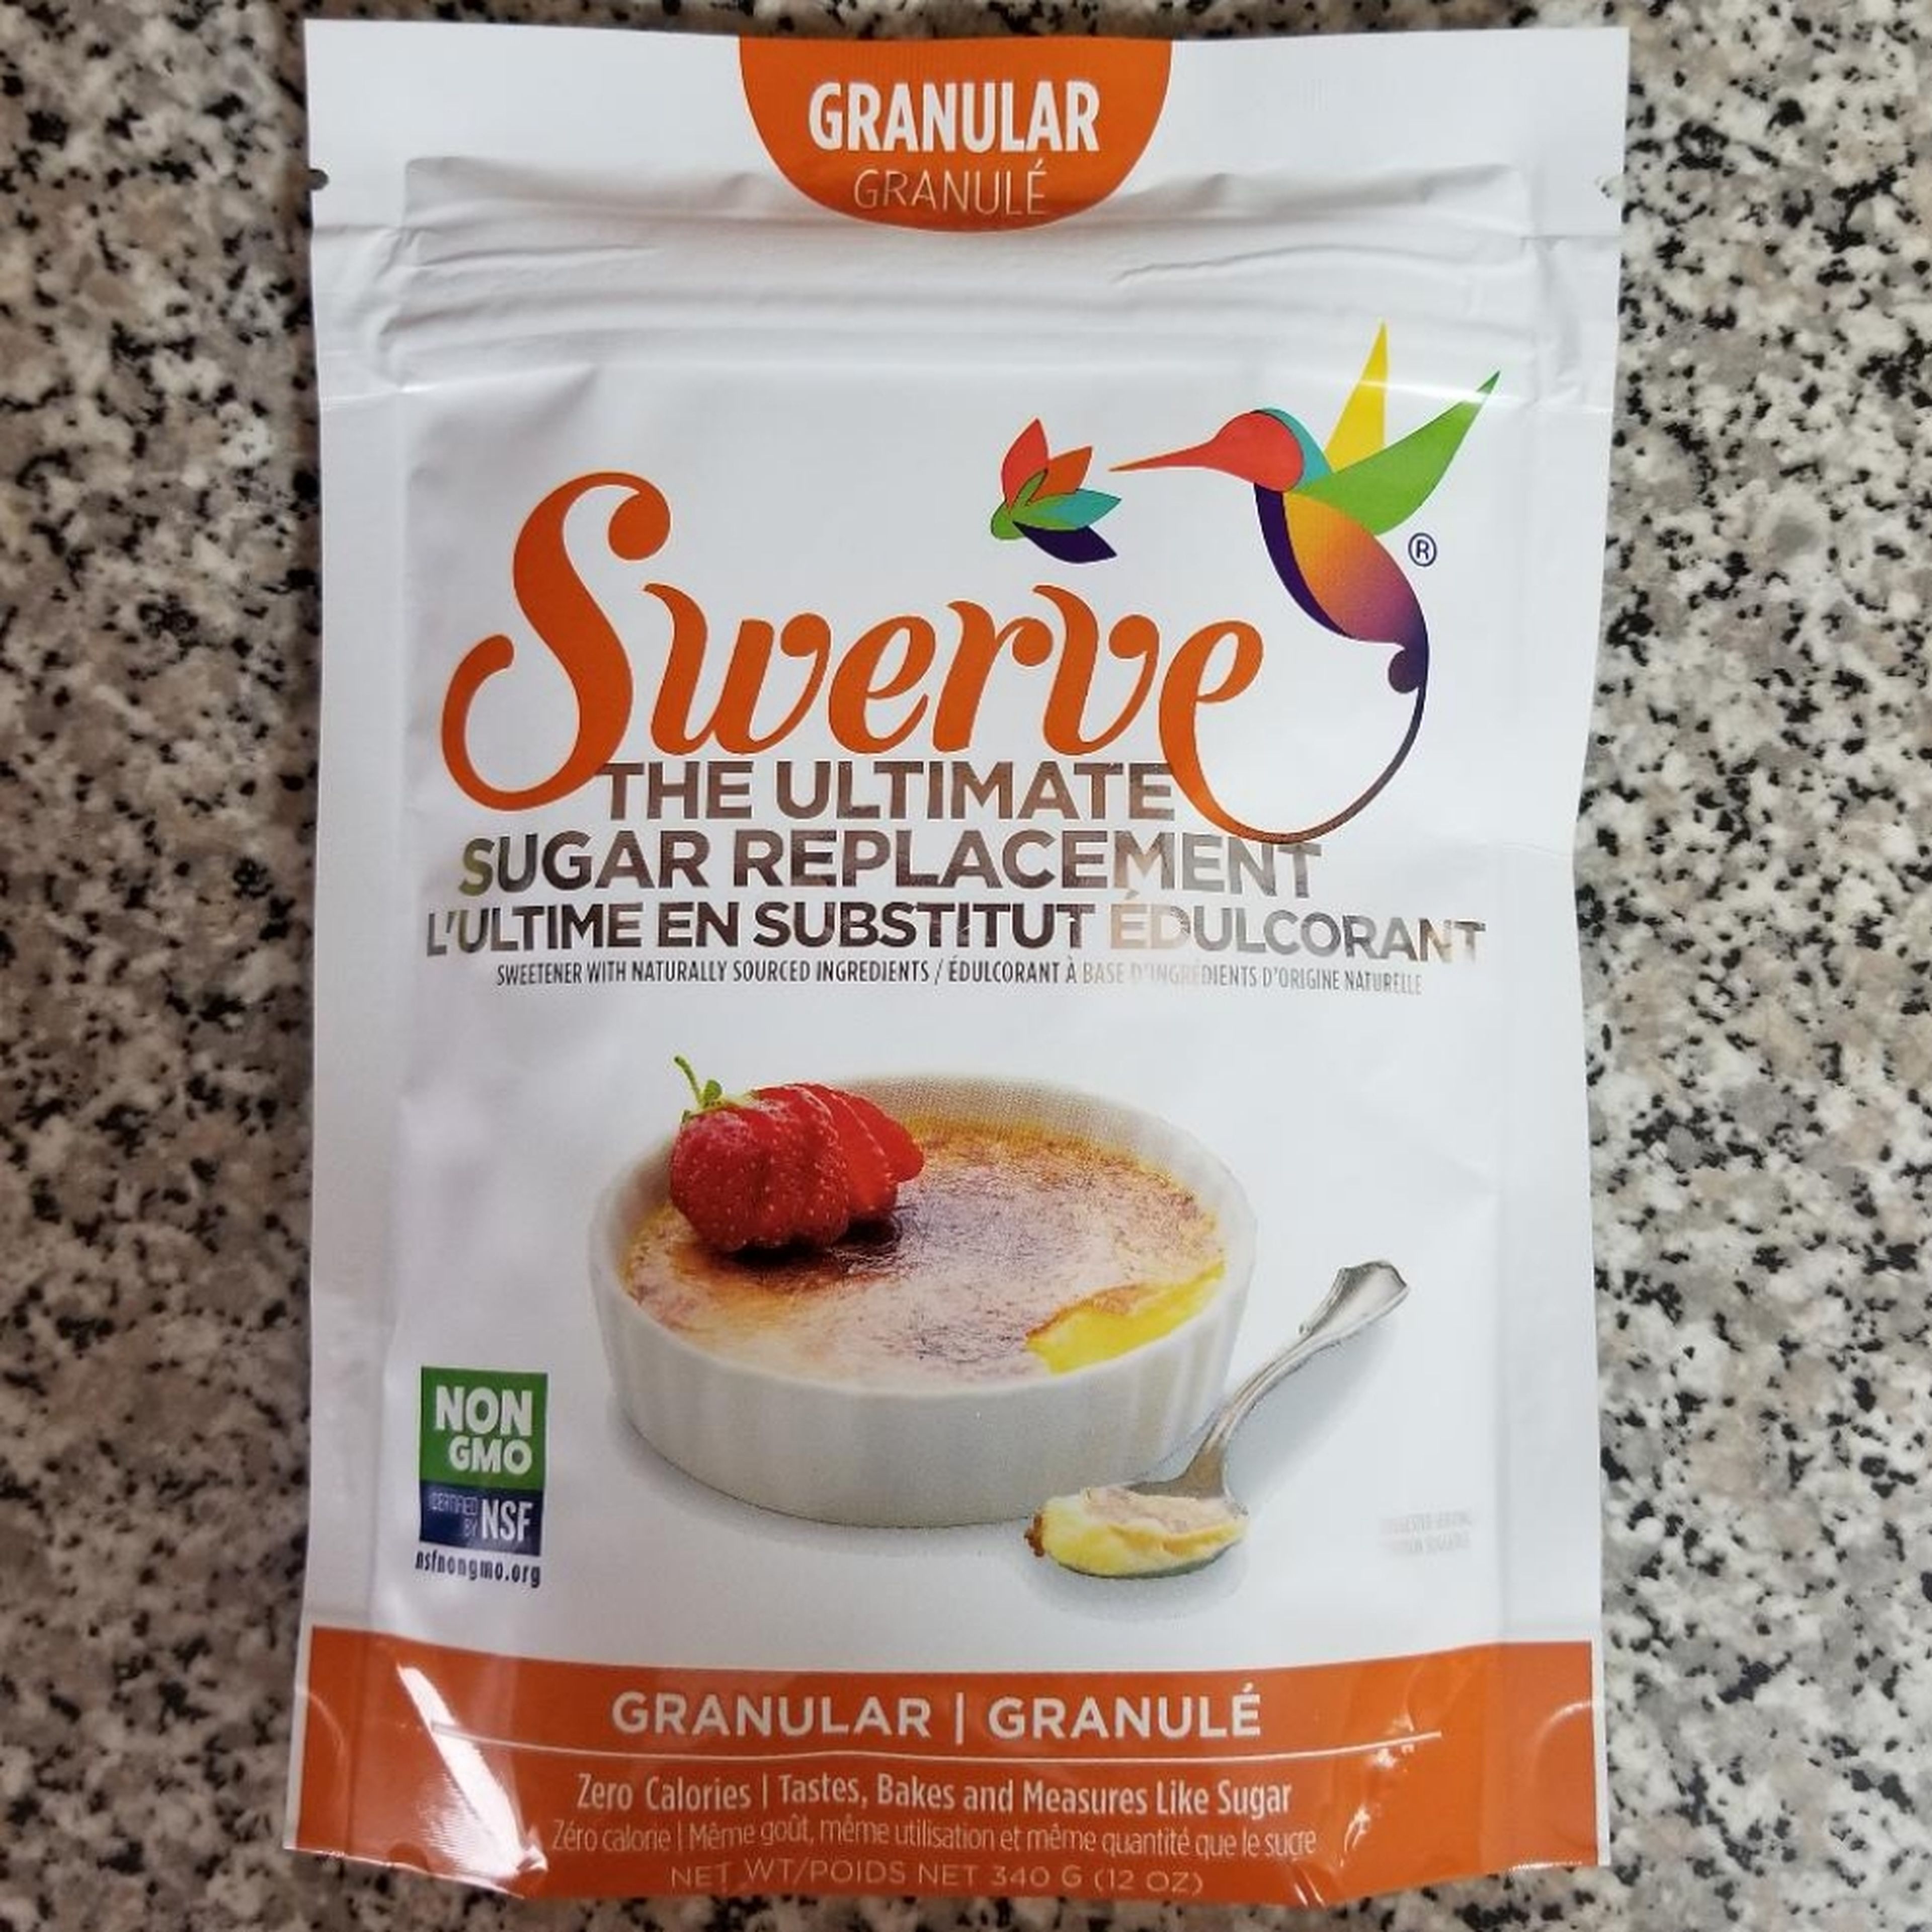 Add 70g of Swerve sweetener to mixing bowl. Available from Whole Foods. Note that 70g will result in a bar that is not overly sweet. Adjust to your taste.